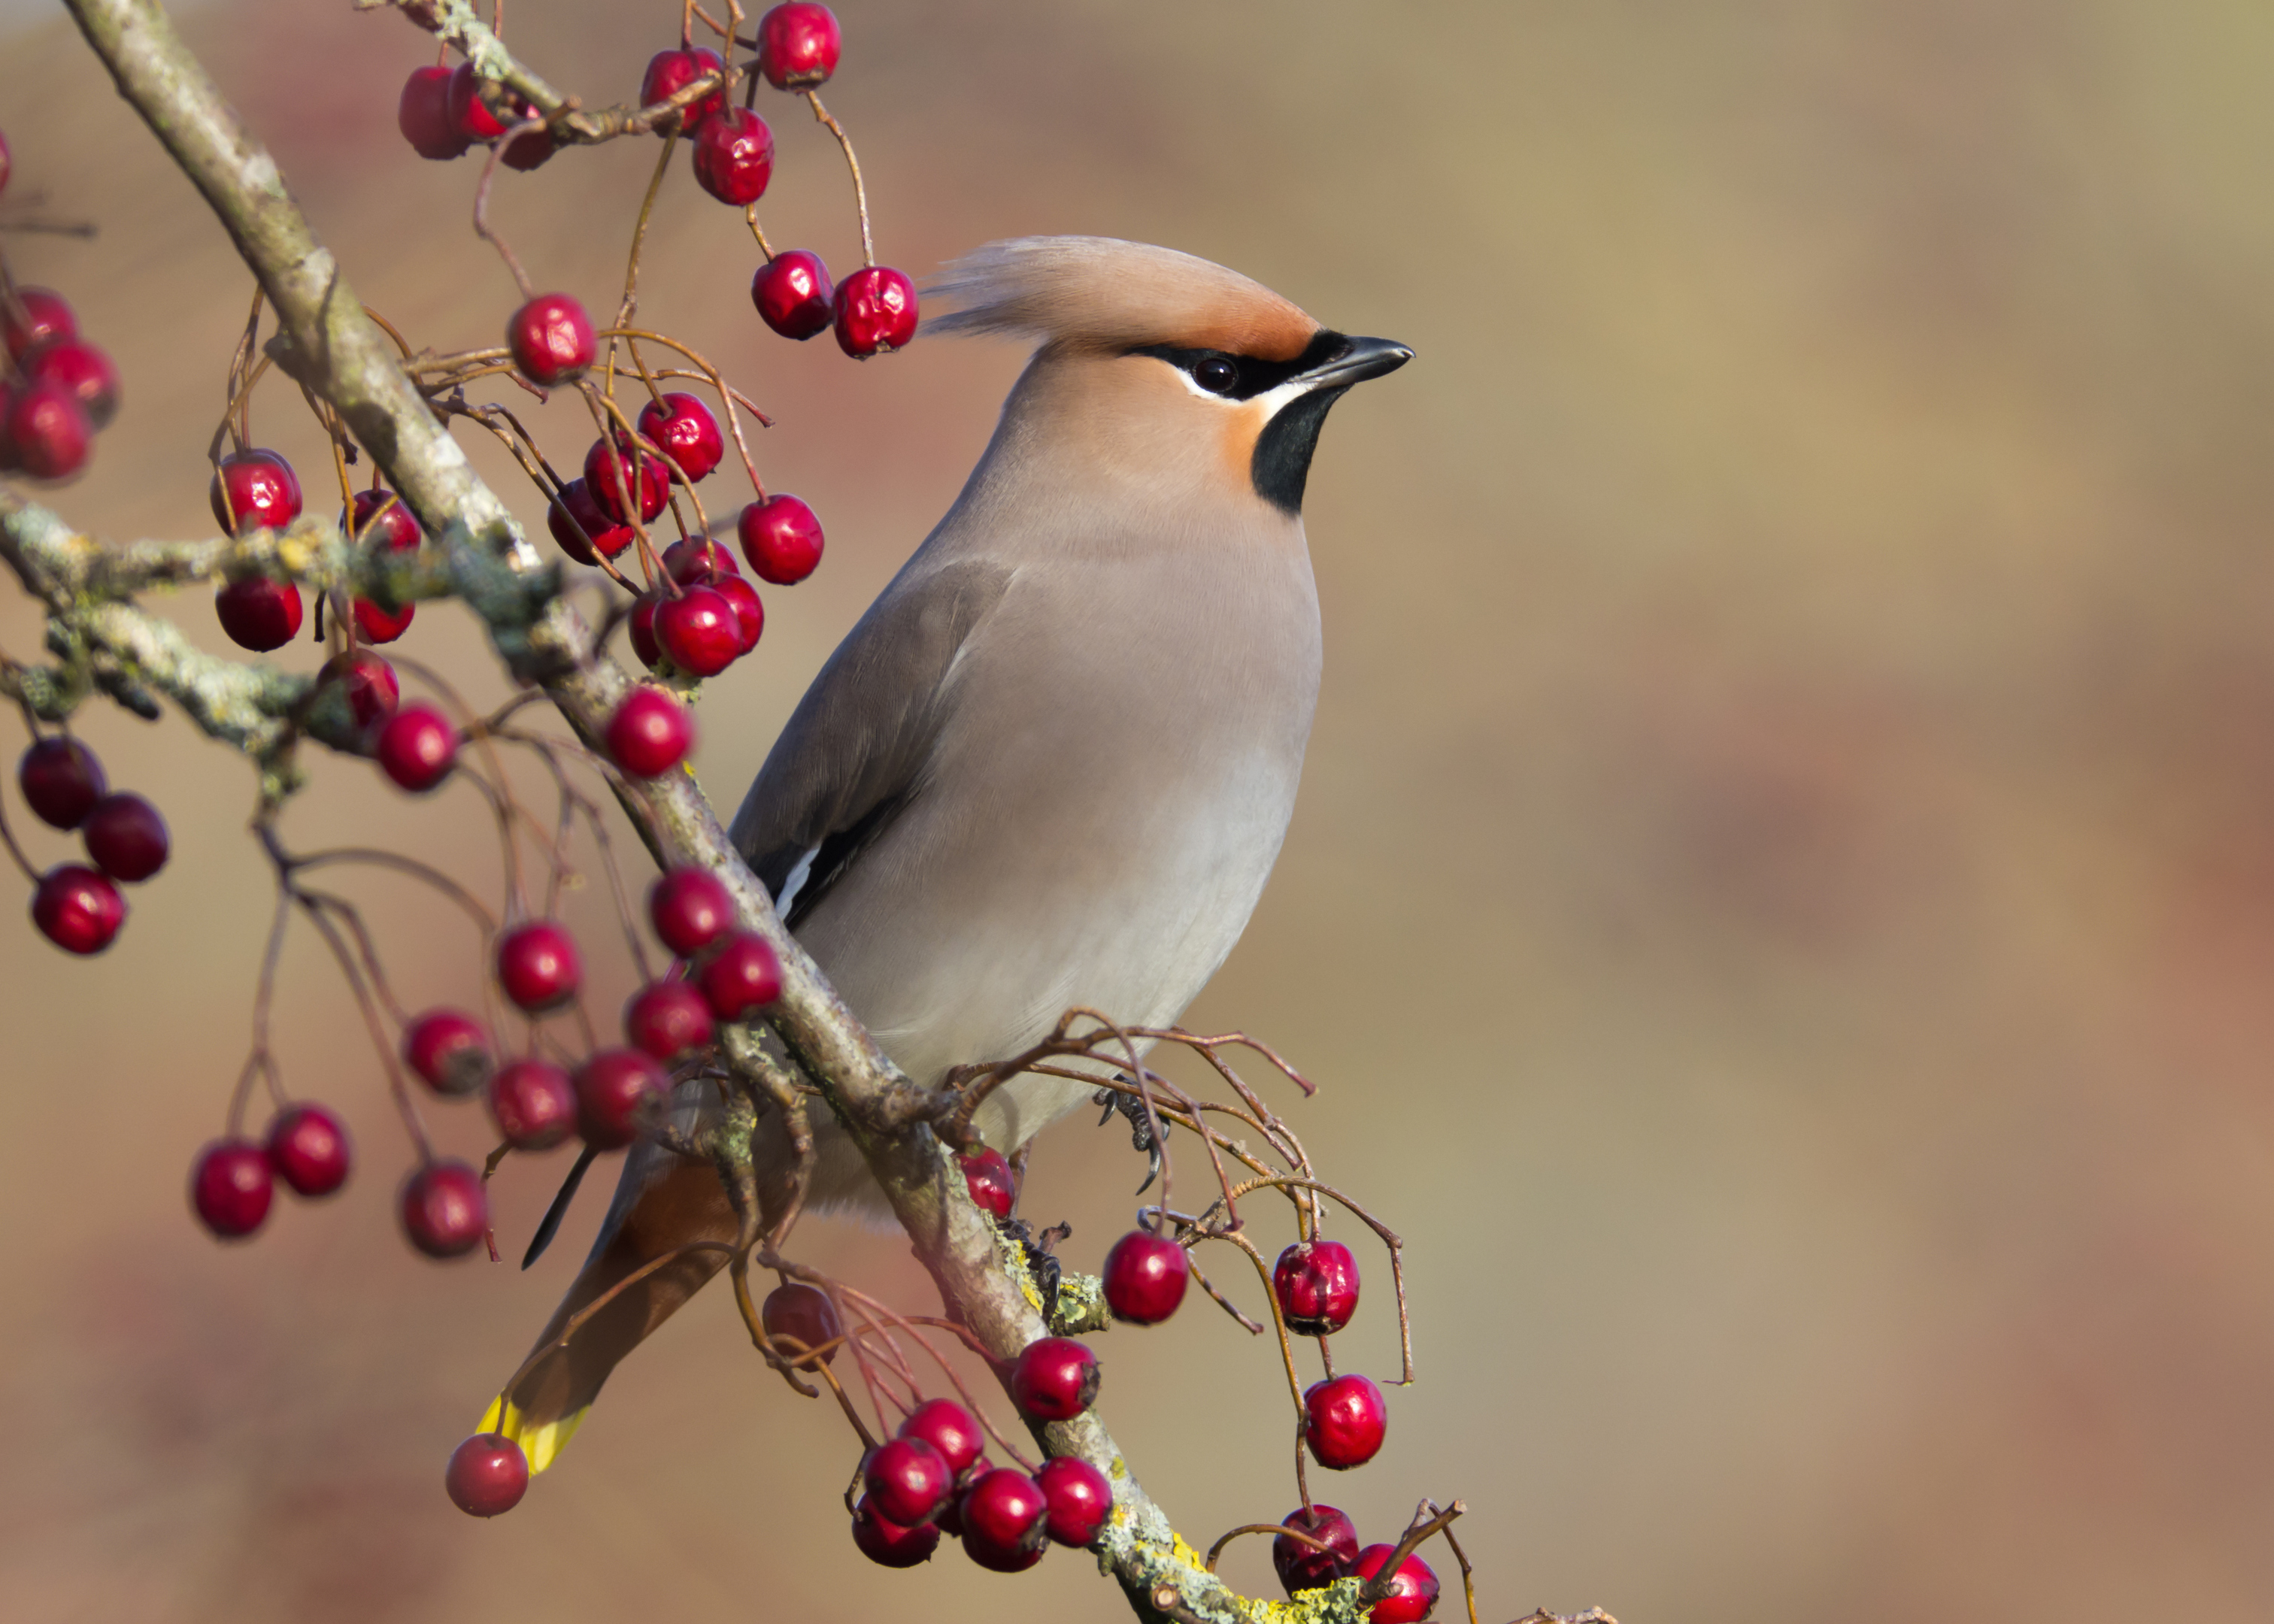 There have been reports of hundreds of waxwings, arriving along the east coast from Scandinavia (iStock, mille19 )